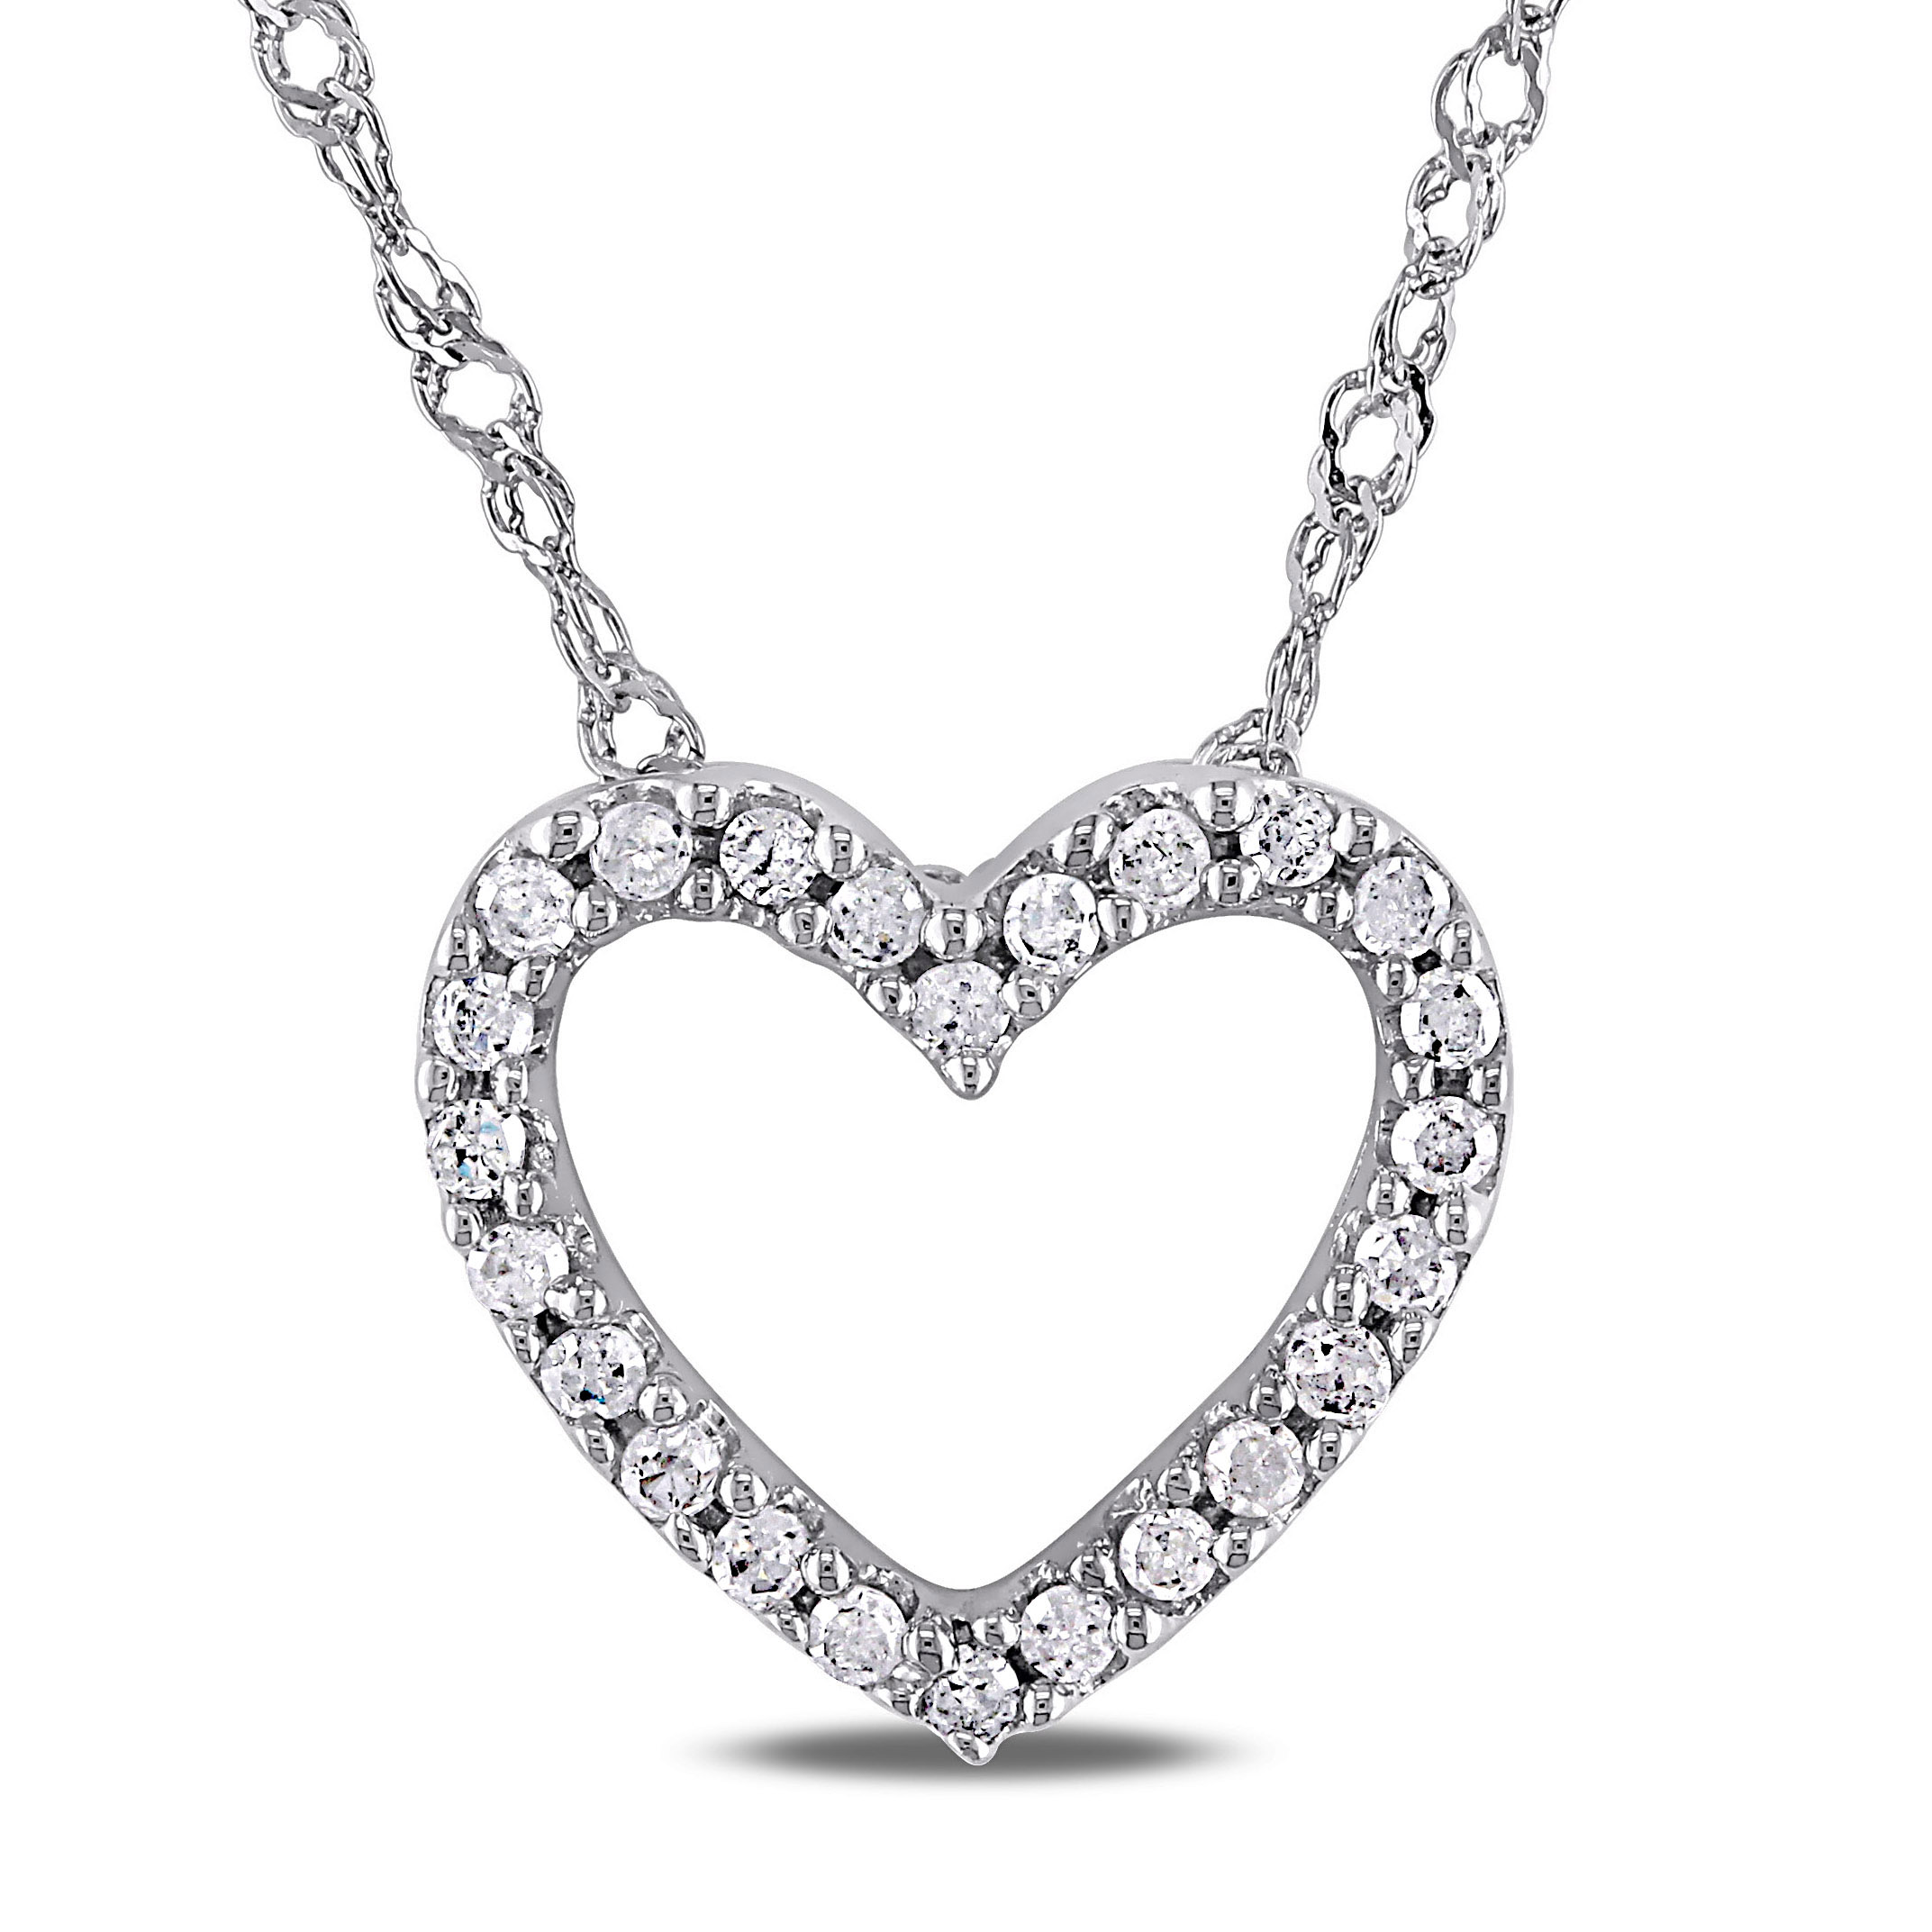 1/10 CT TW Diamond Heart Pendant with Chain in 14k White Gold